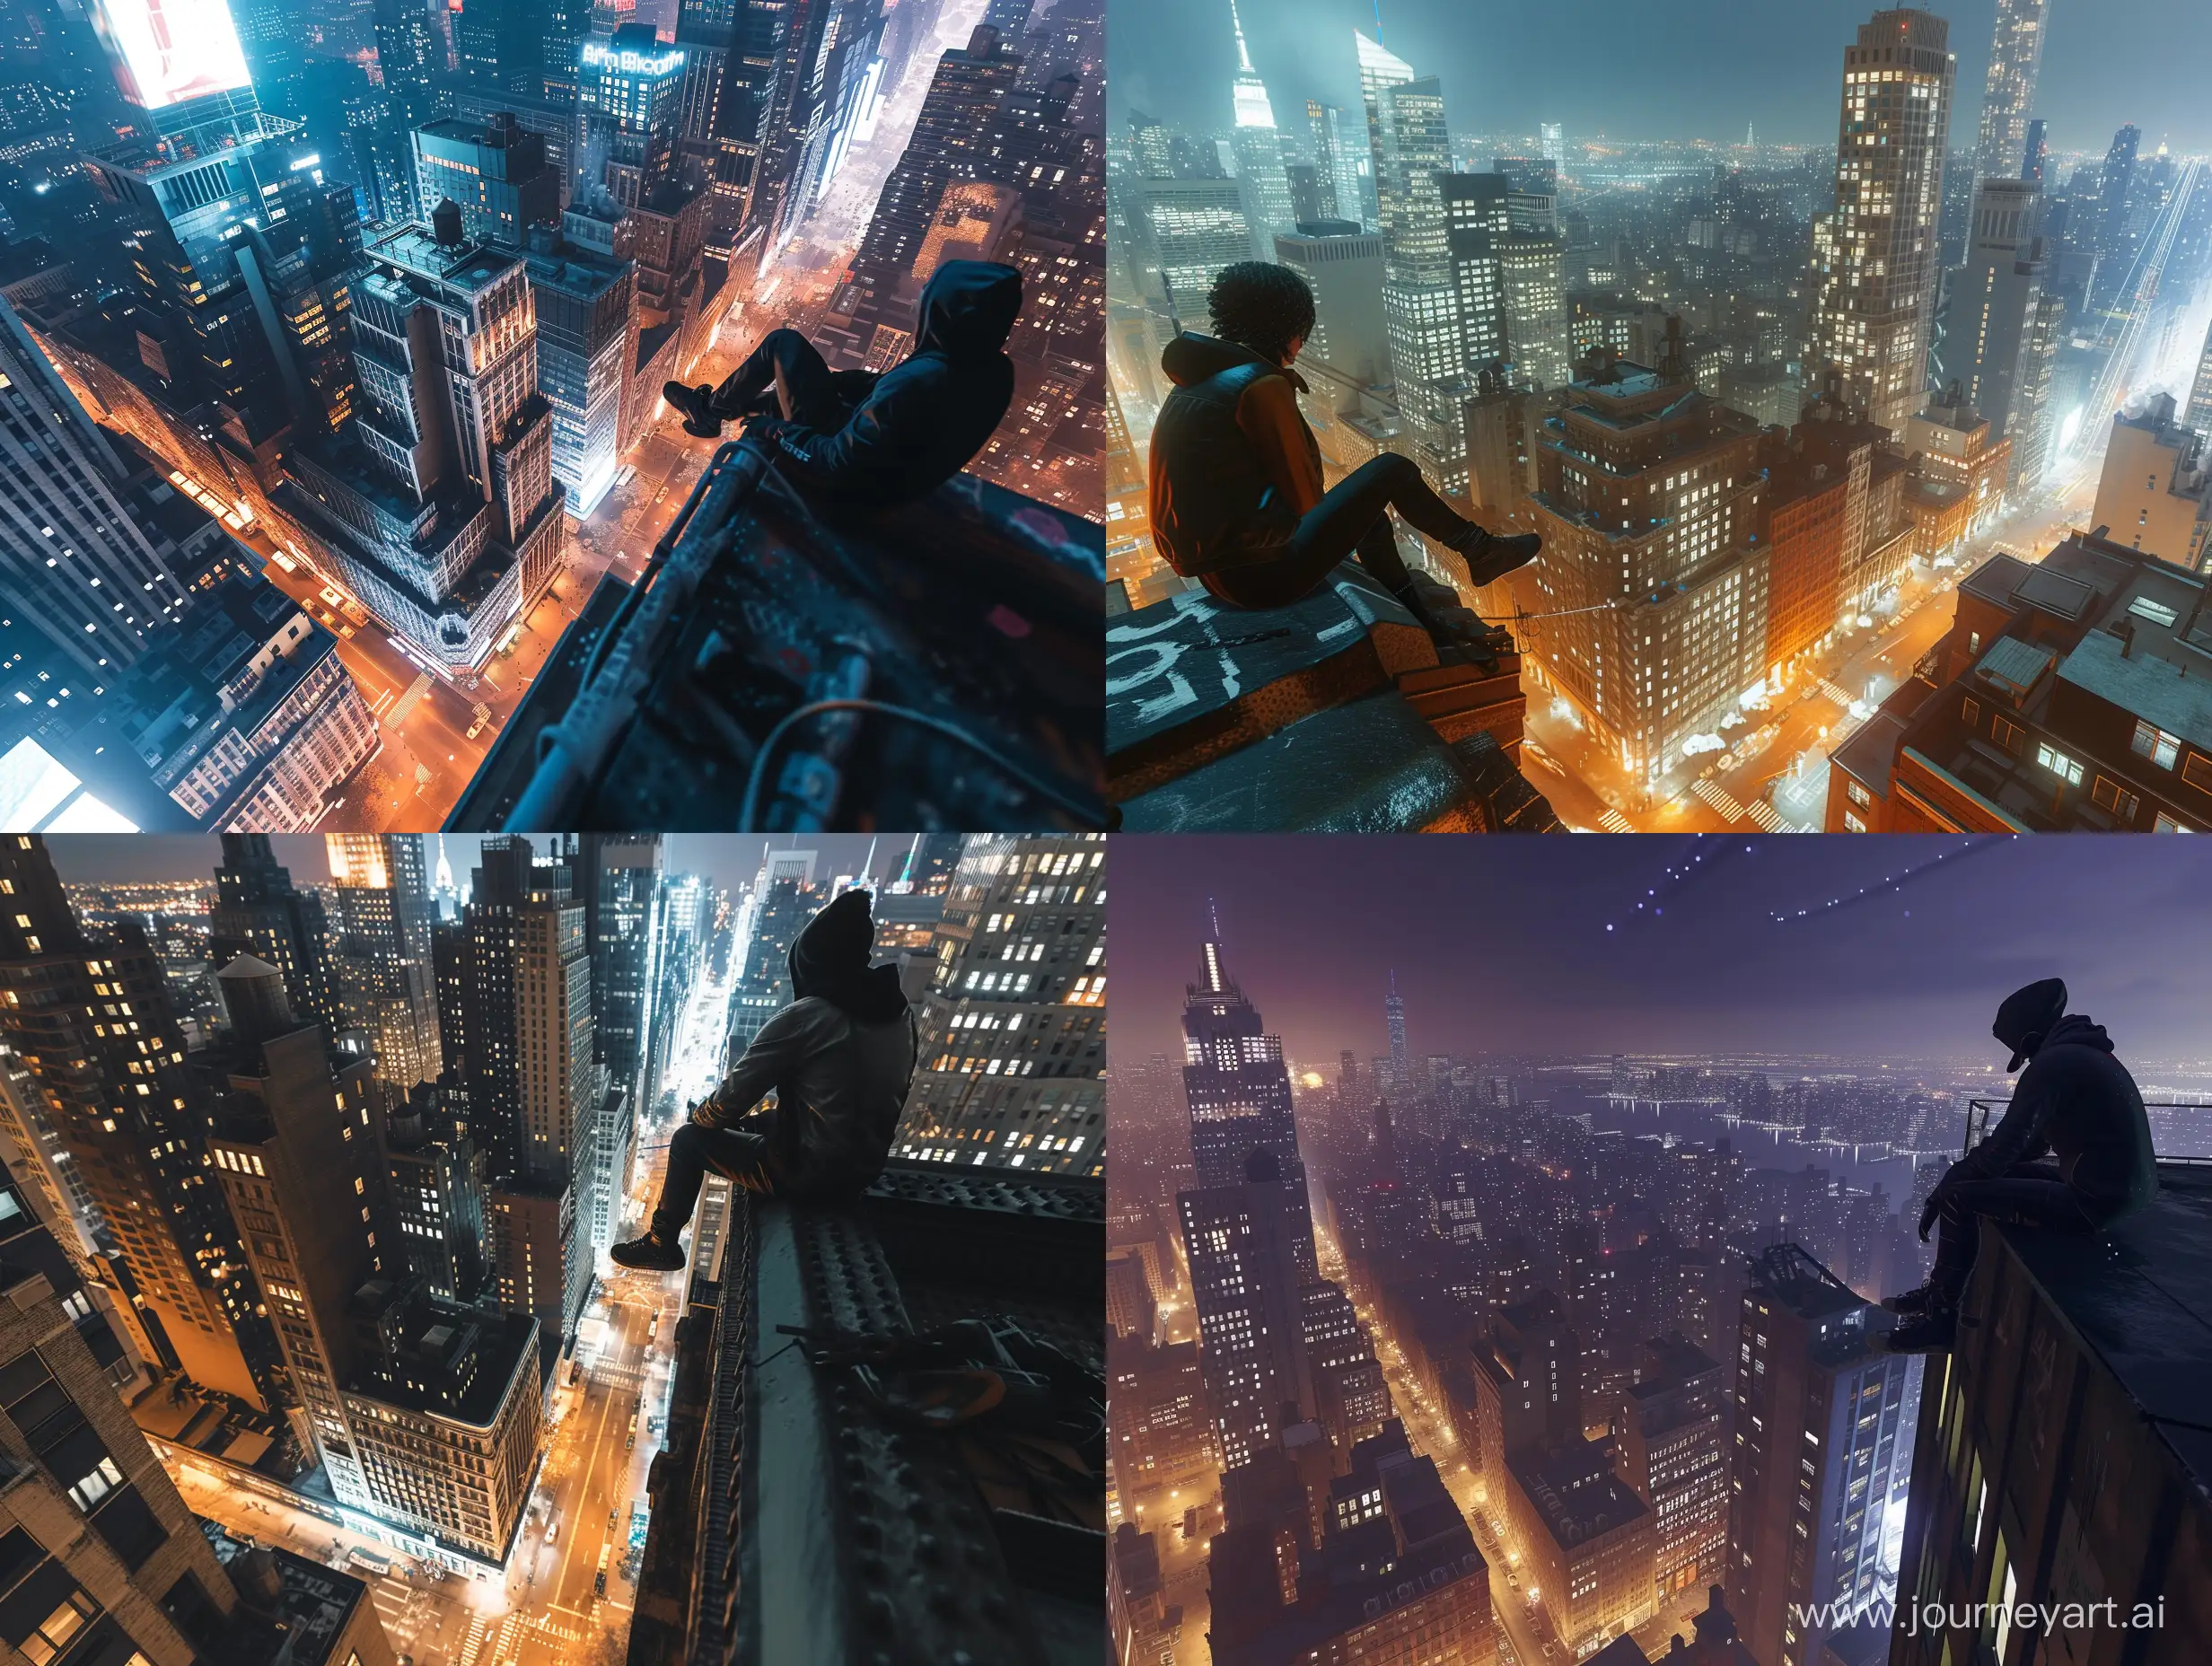 Capture stunning images of the open world surroundings in Manhattan, New York. Take the photos from a 3rd-person viewpoint while sitting on the edge of a tall rooftop building at nighttime. The cityscape has a science fiction-like quality.



